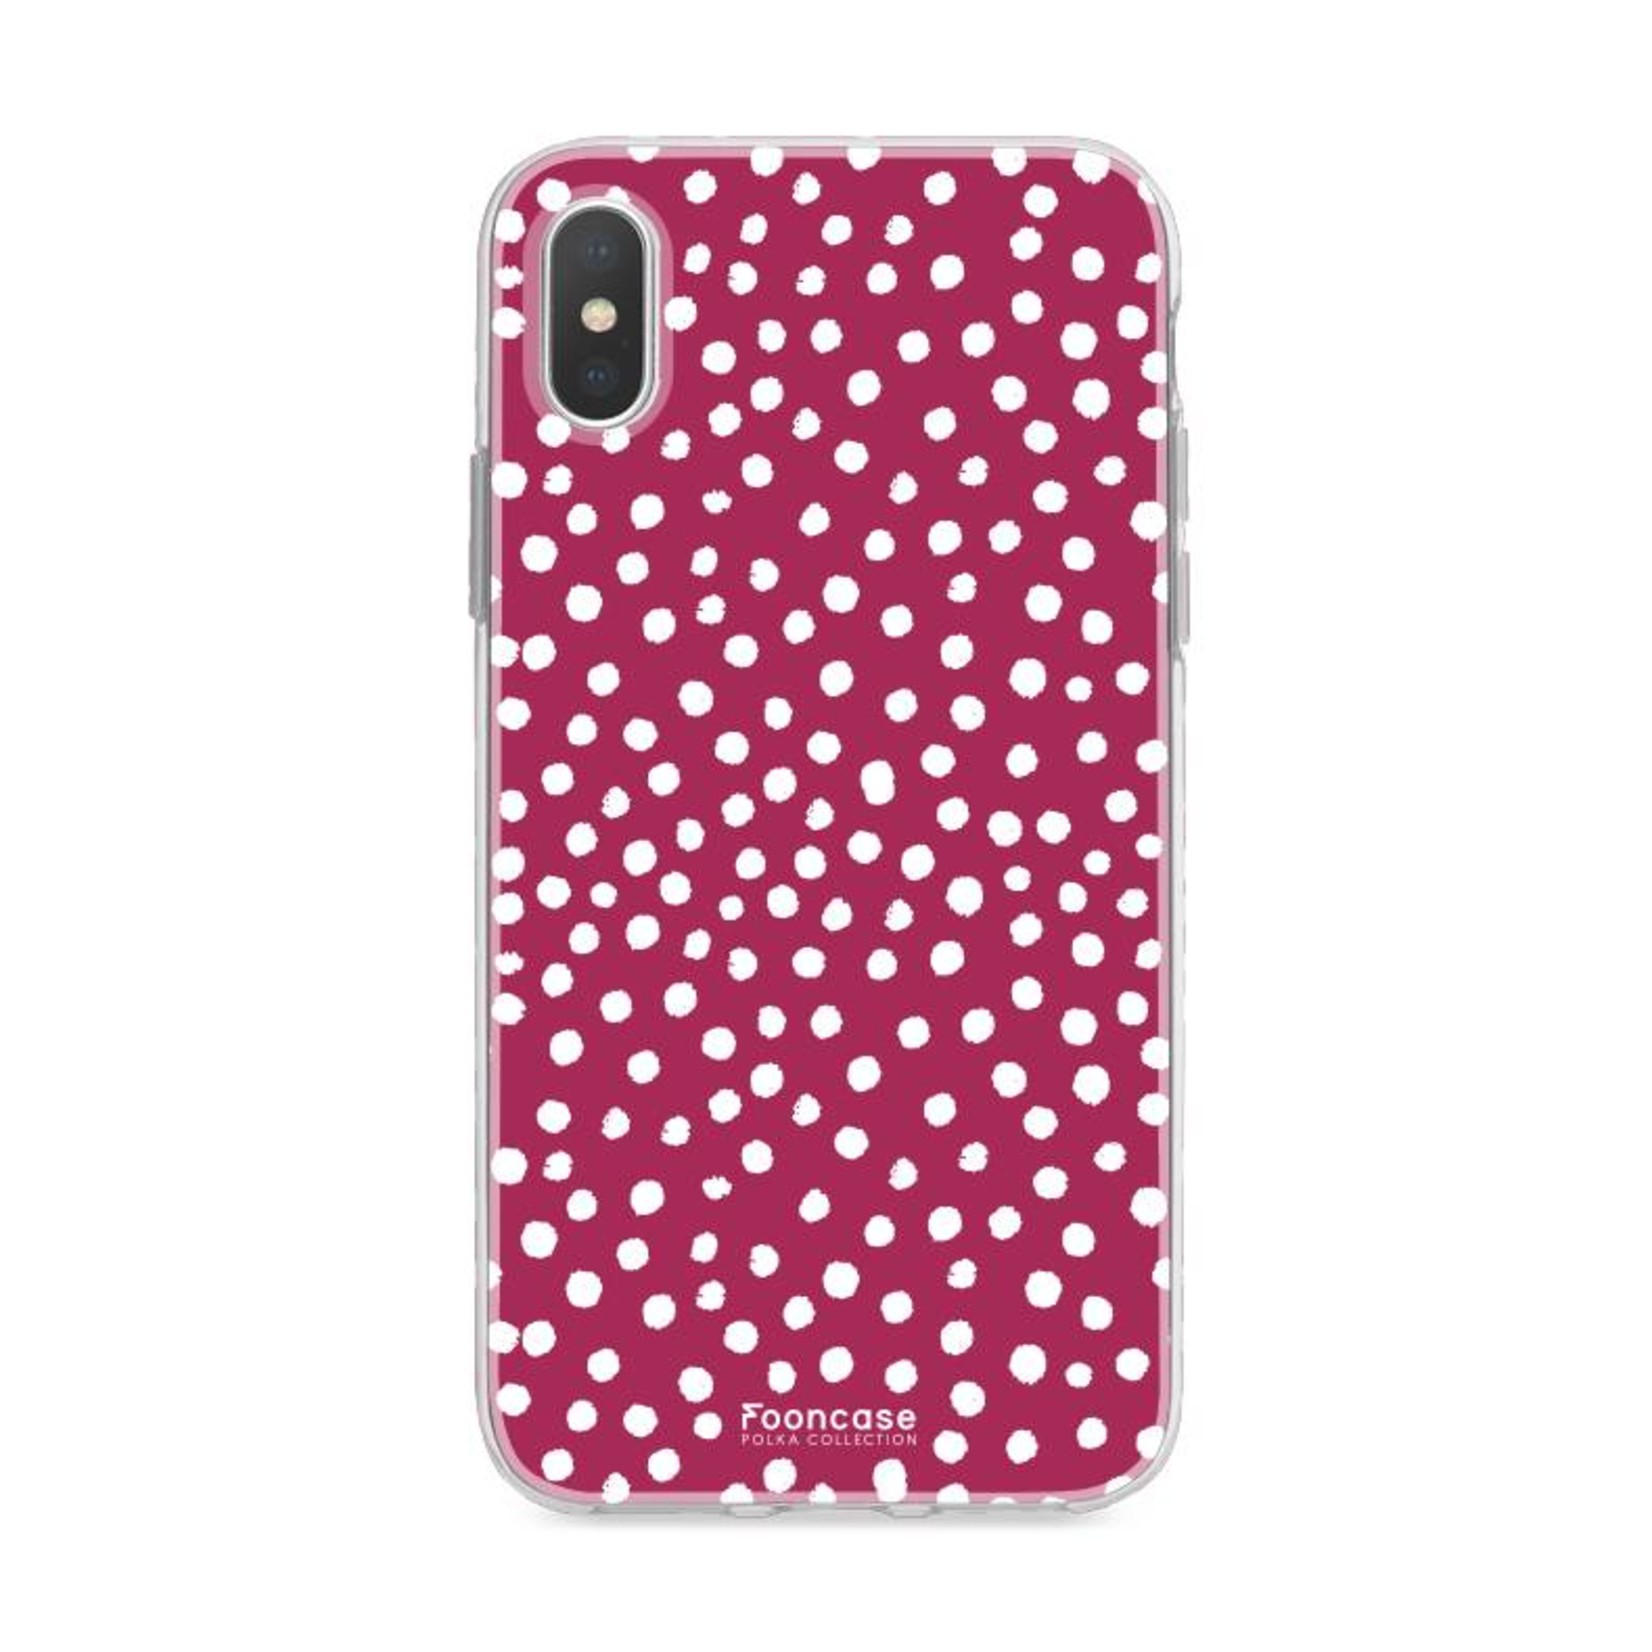 FOONCASE Iphone XS - POLKA COLLECTION / BordeauXS Red